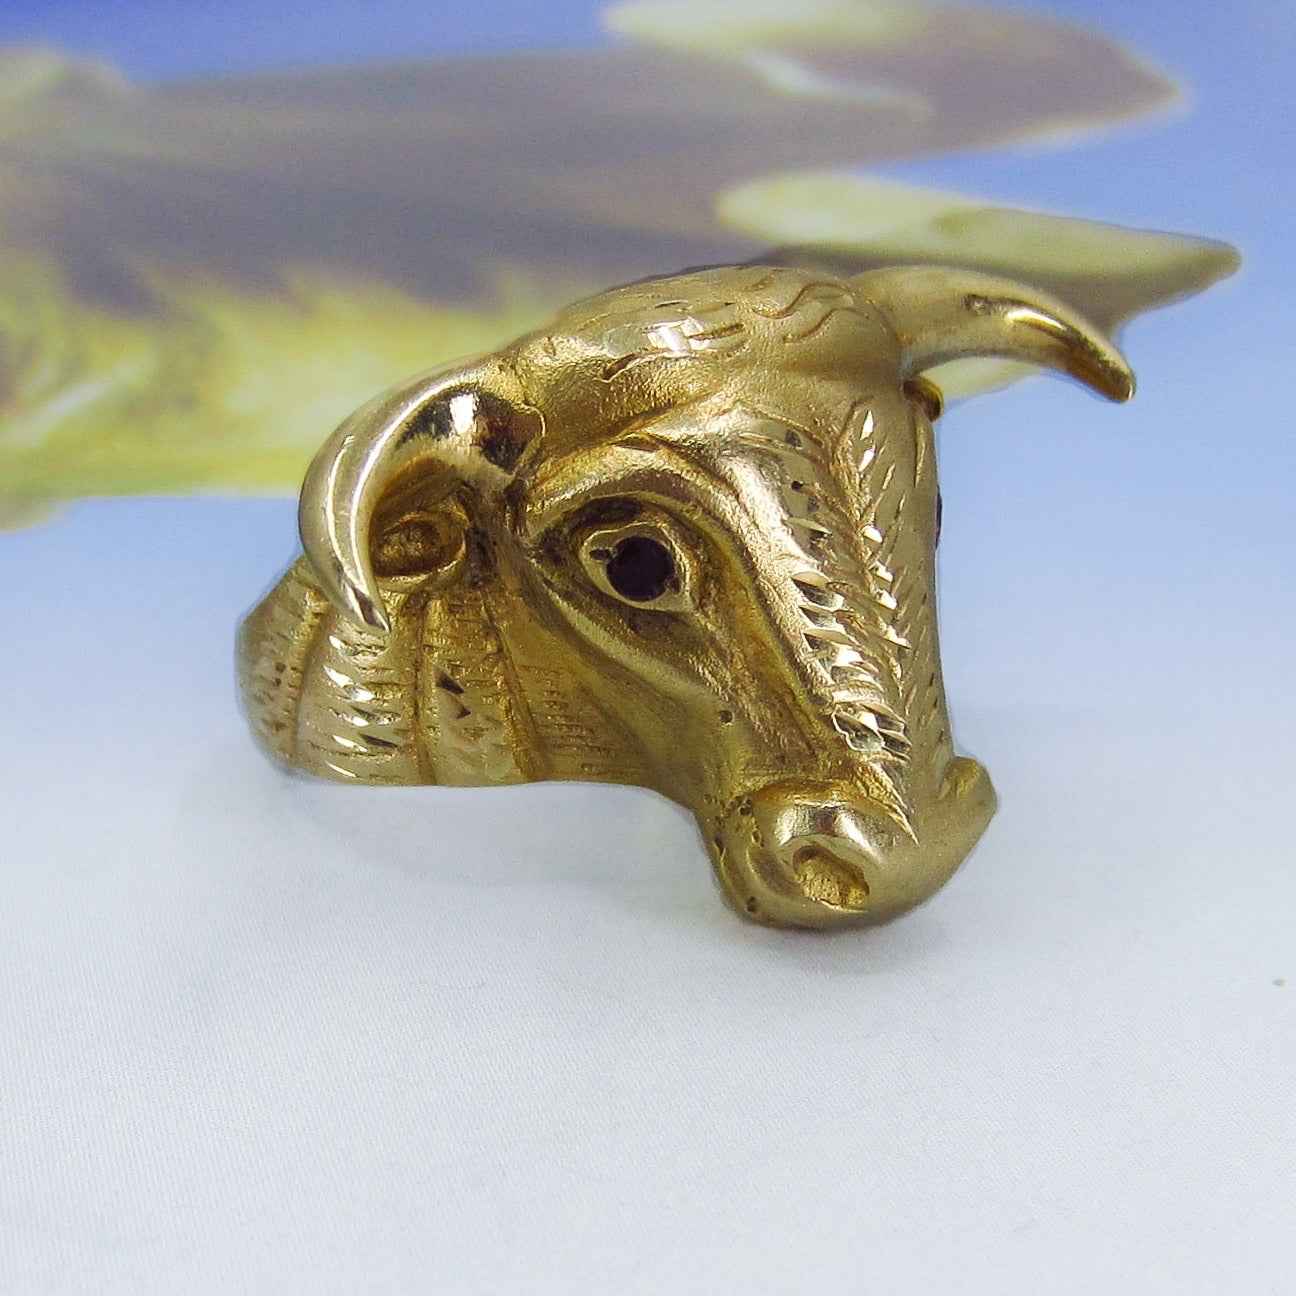 SOLD--Giant Bull Ring with Ruby Eyes 14k c. 1960